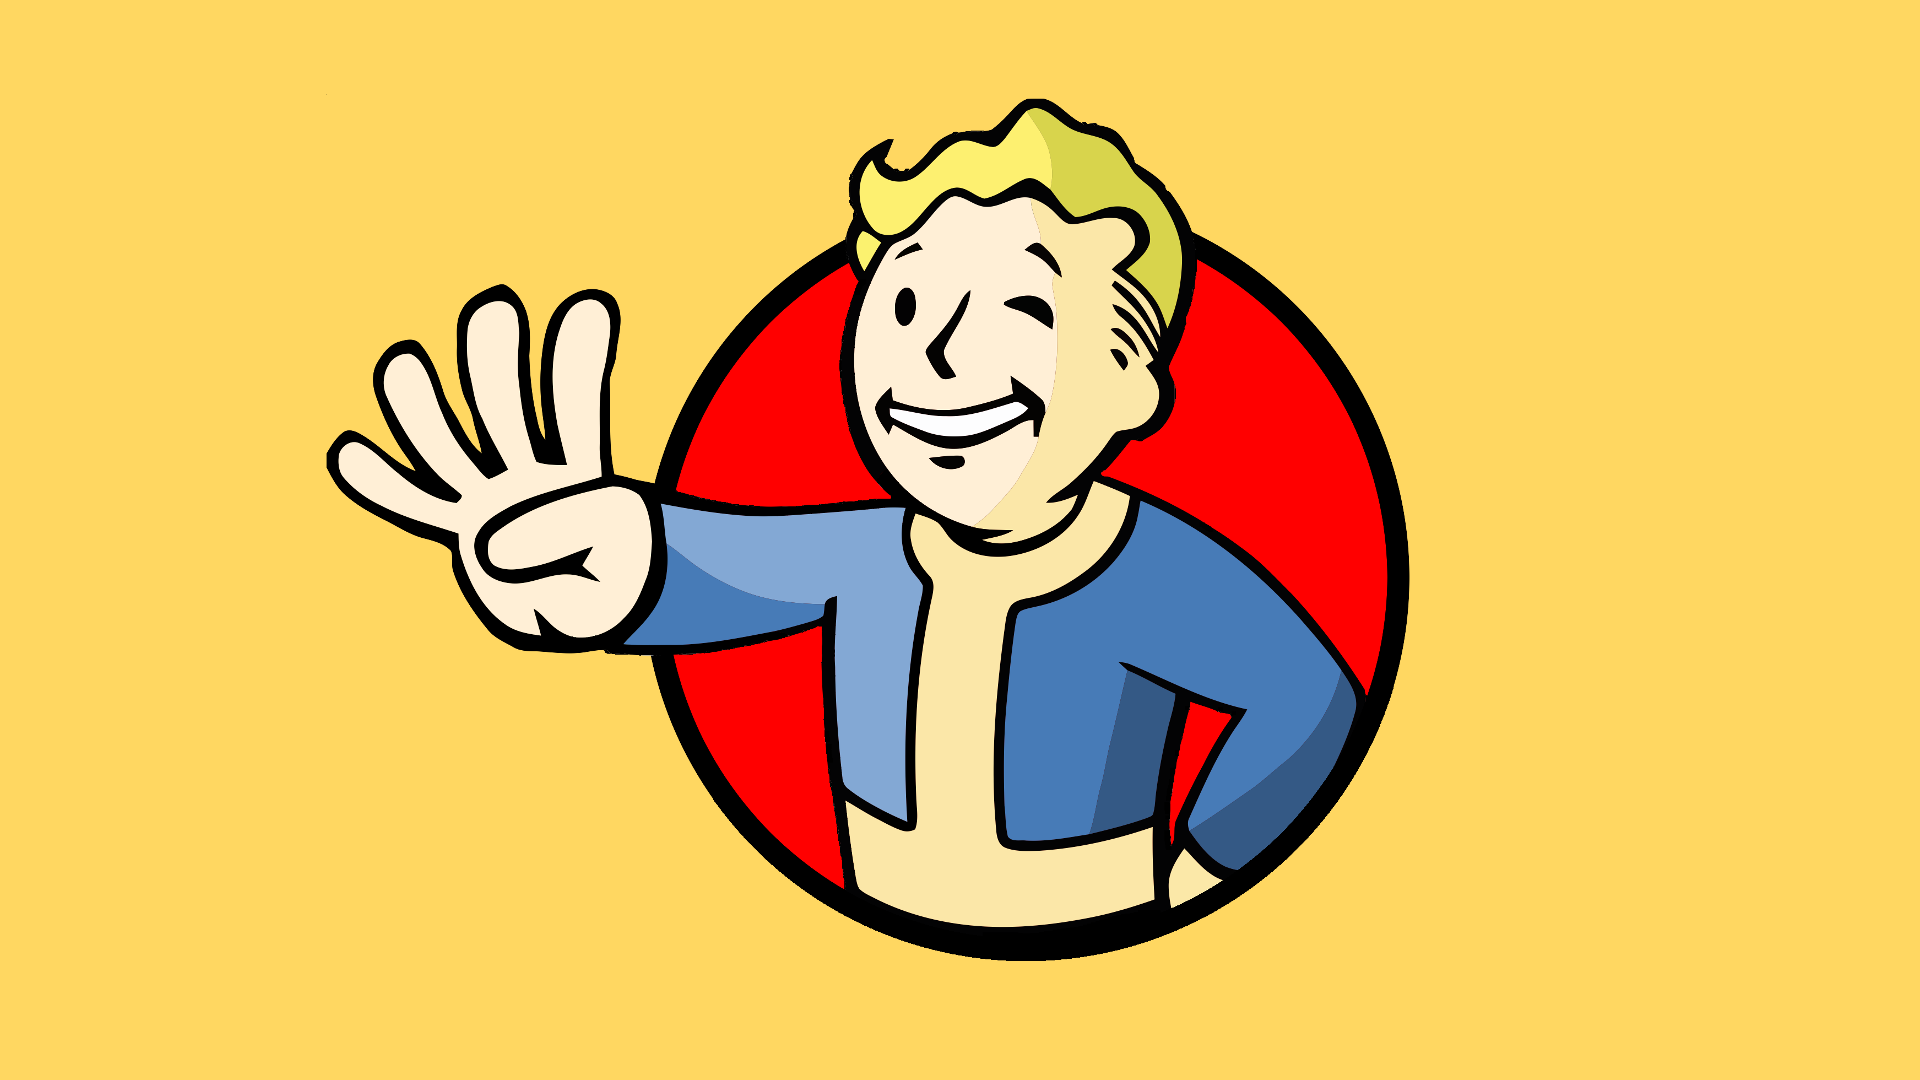 General 1920x1080 video games yellow Fallout Fallout 4 PC gaming yellow background